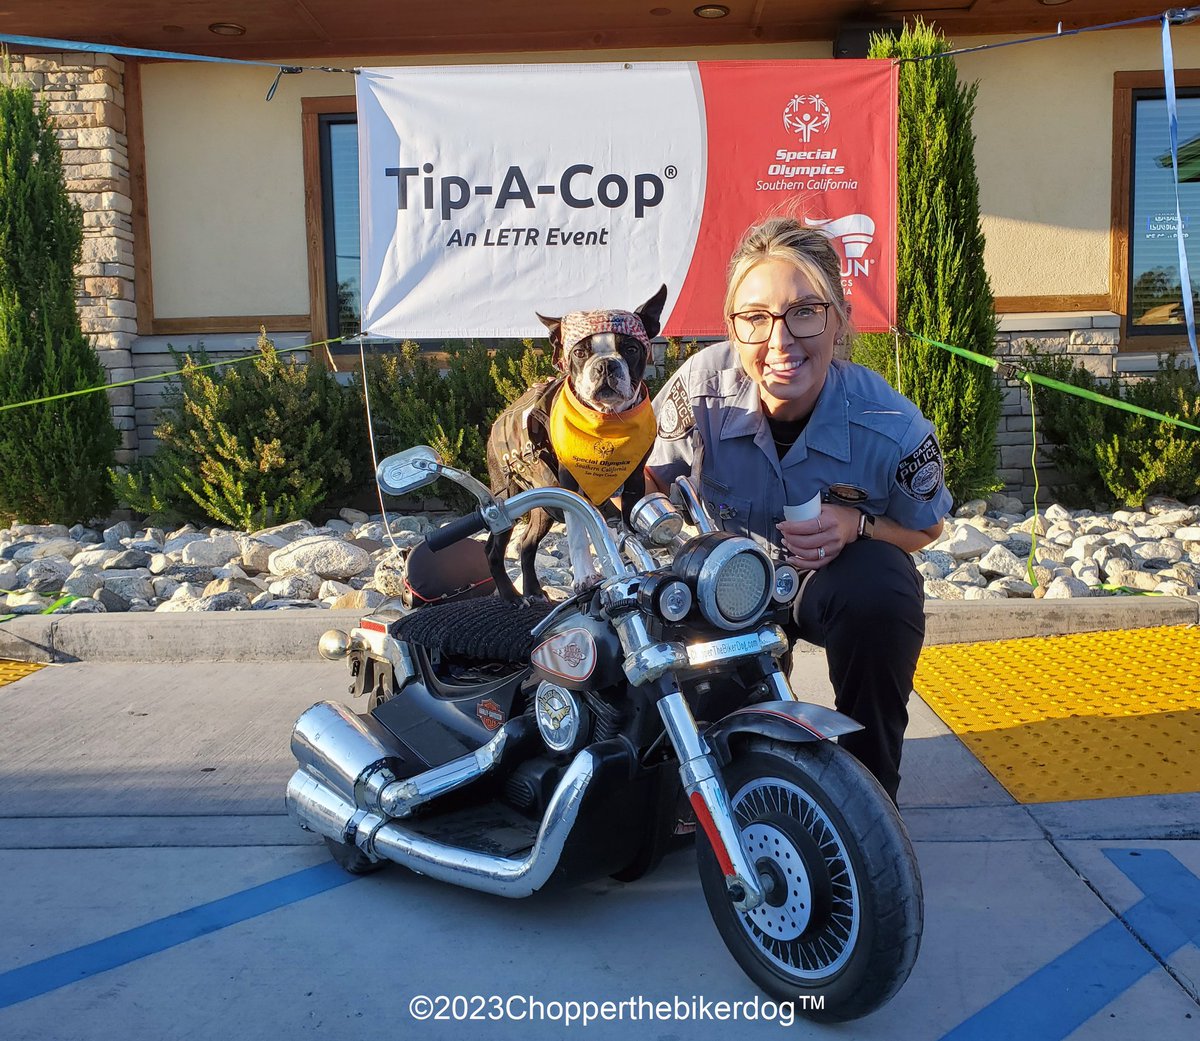 Great night with the @elcajonpolice raising money for the @SOSoCal ❤️🇺🇸💙 #TipACop 

Even hanging with the Chief 👍👮

#Chopper #Bikerdog #LittleChopper #ChopperII #ChopperJr #TeamChopper #dogsoninstagram #dogsofinstagram #MakingADifference